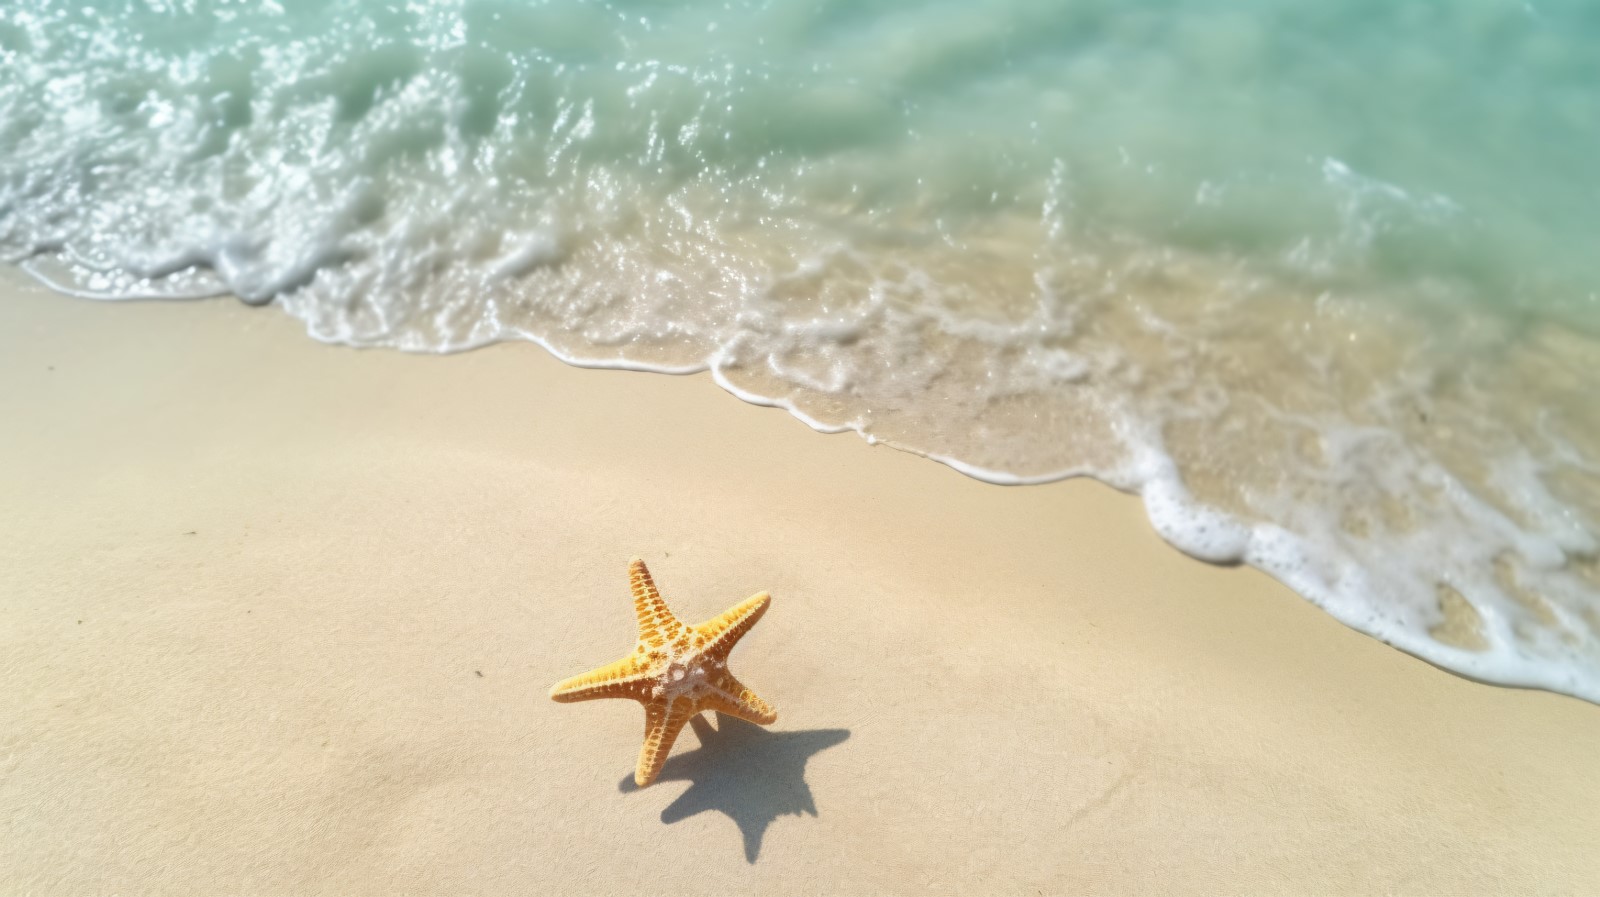 Starfish and seashell on the sandy beach in sea water 375